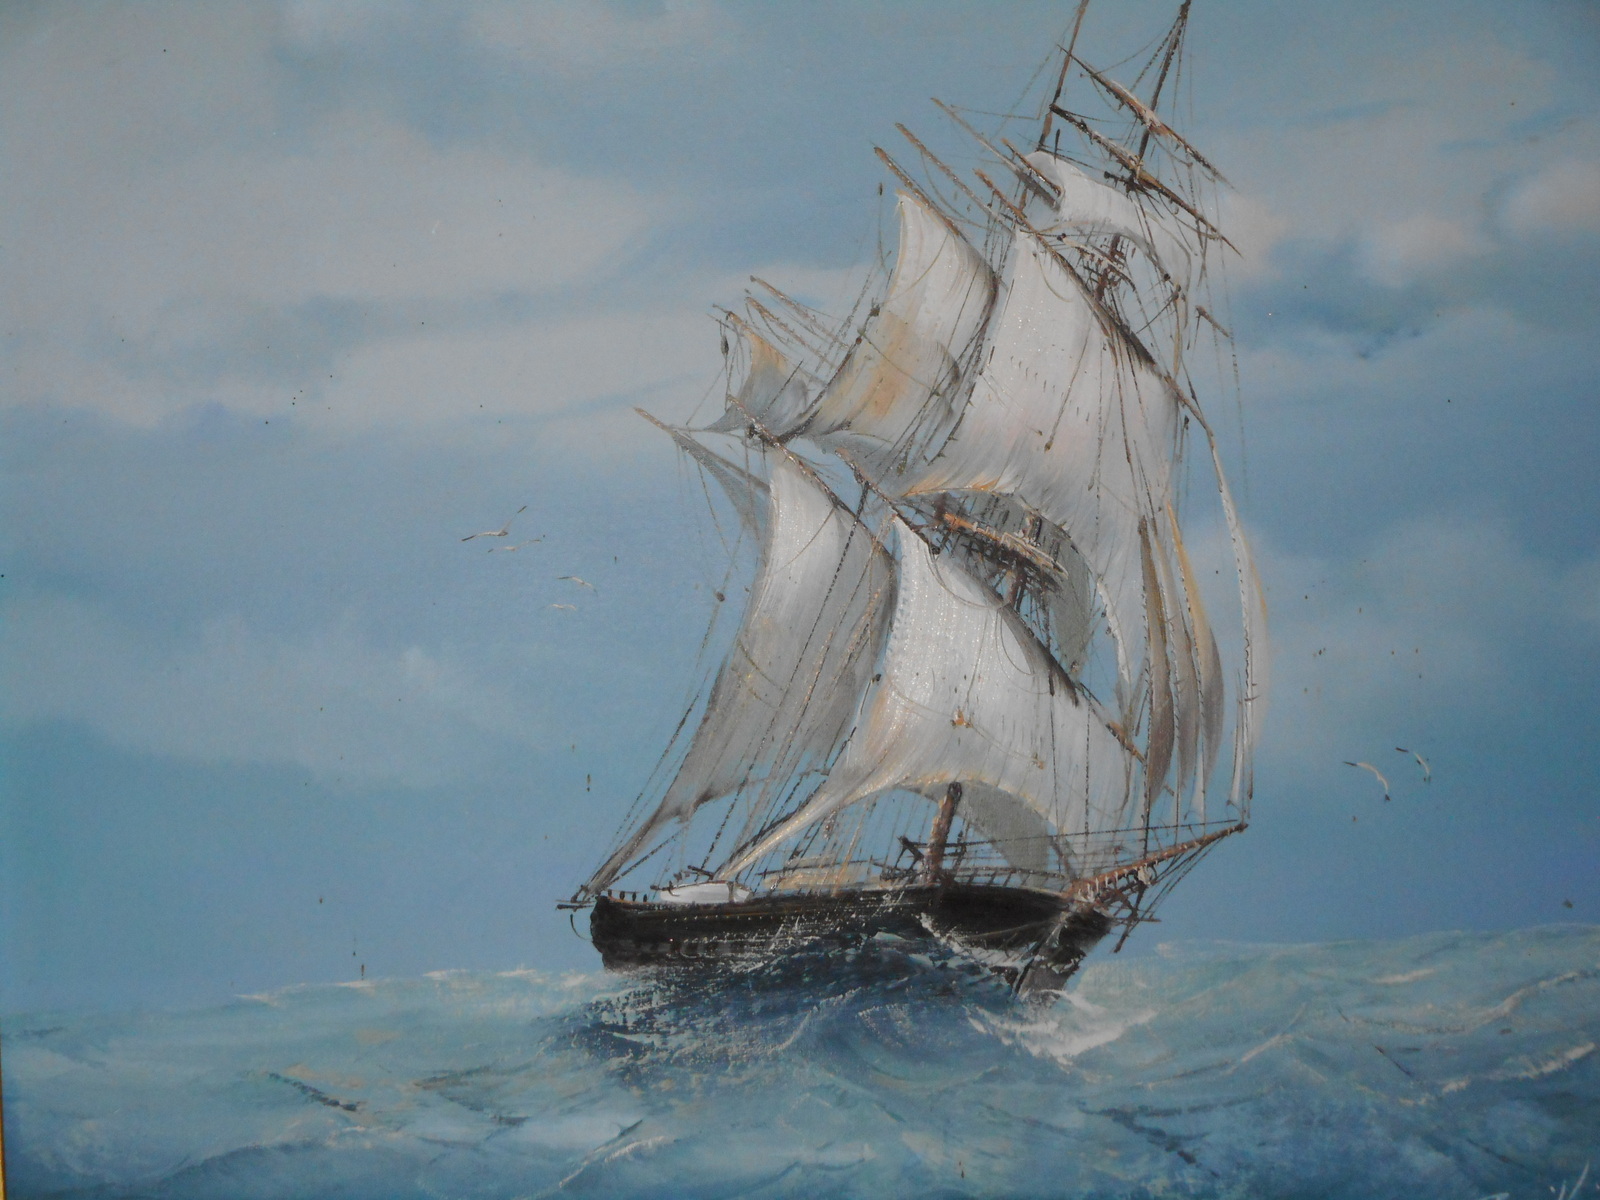 Sailing ship oil painting by Baill